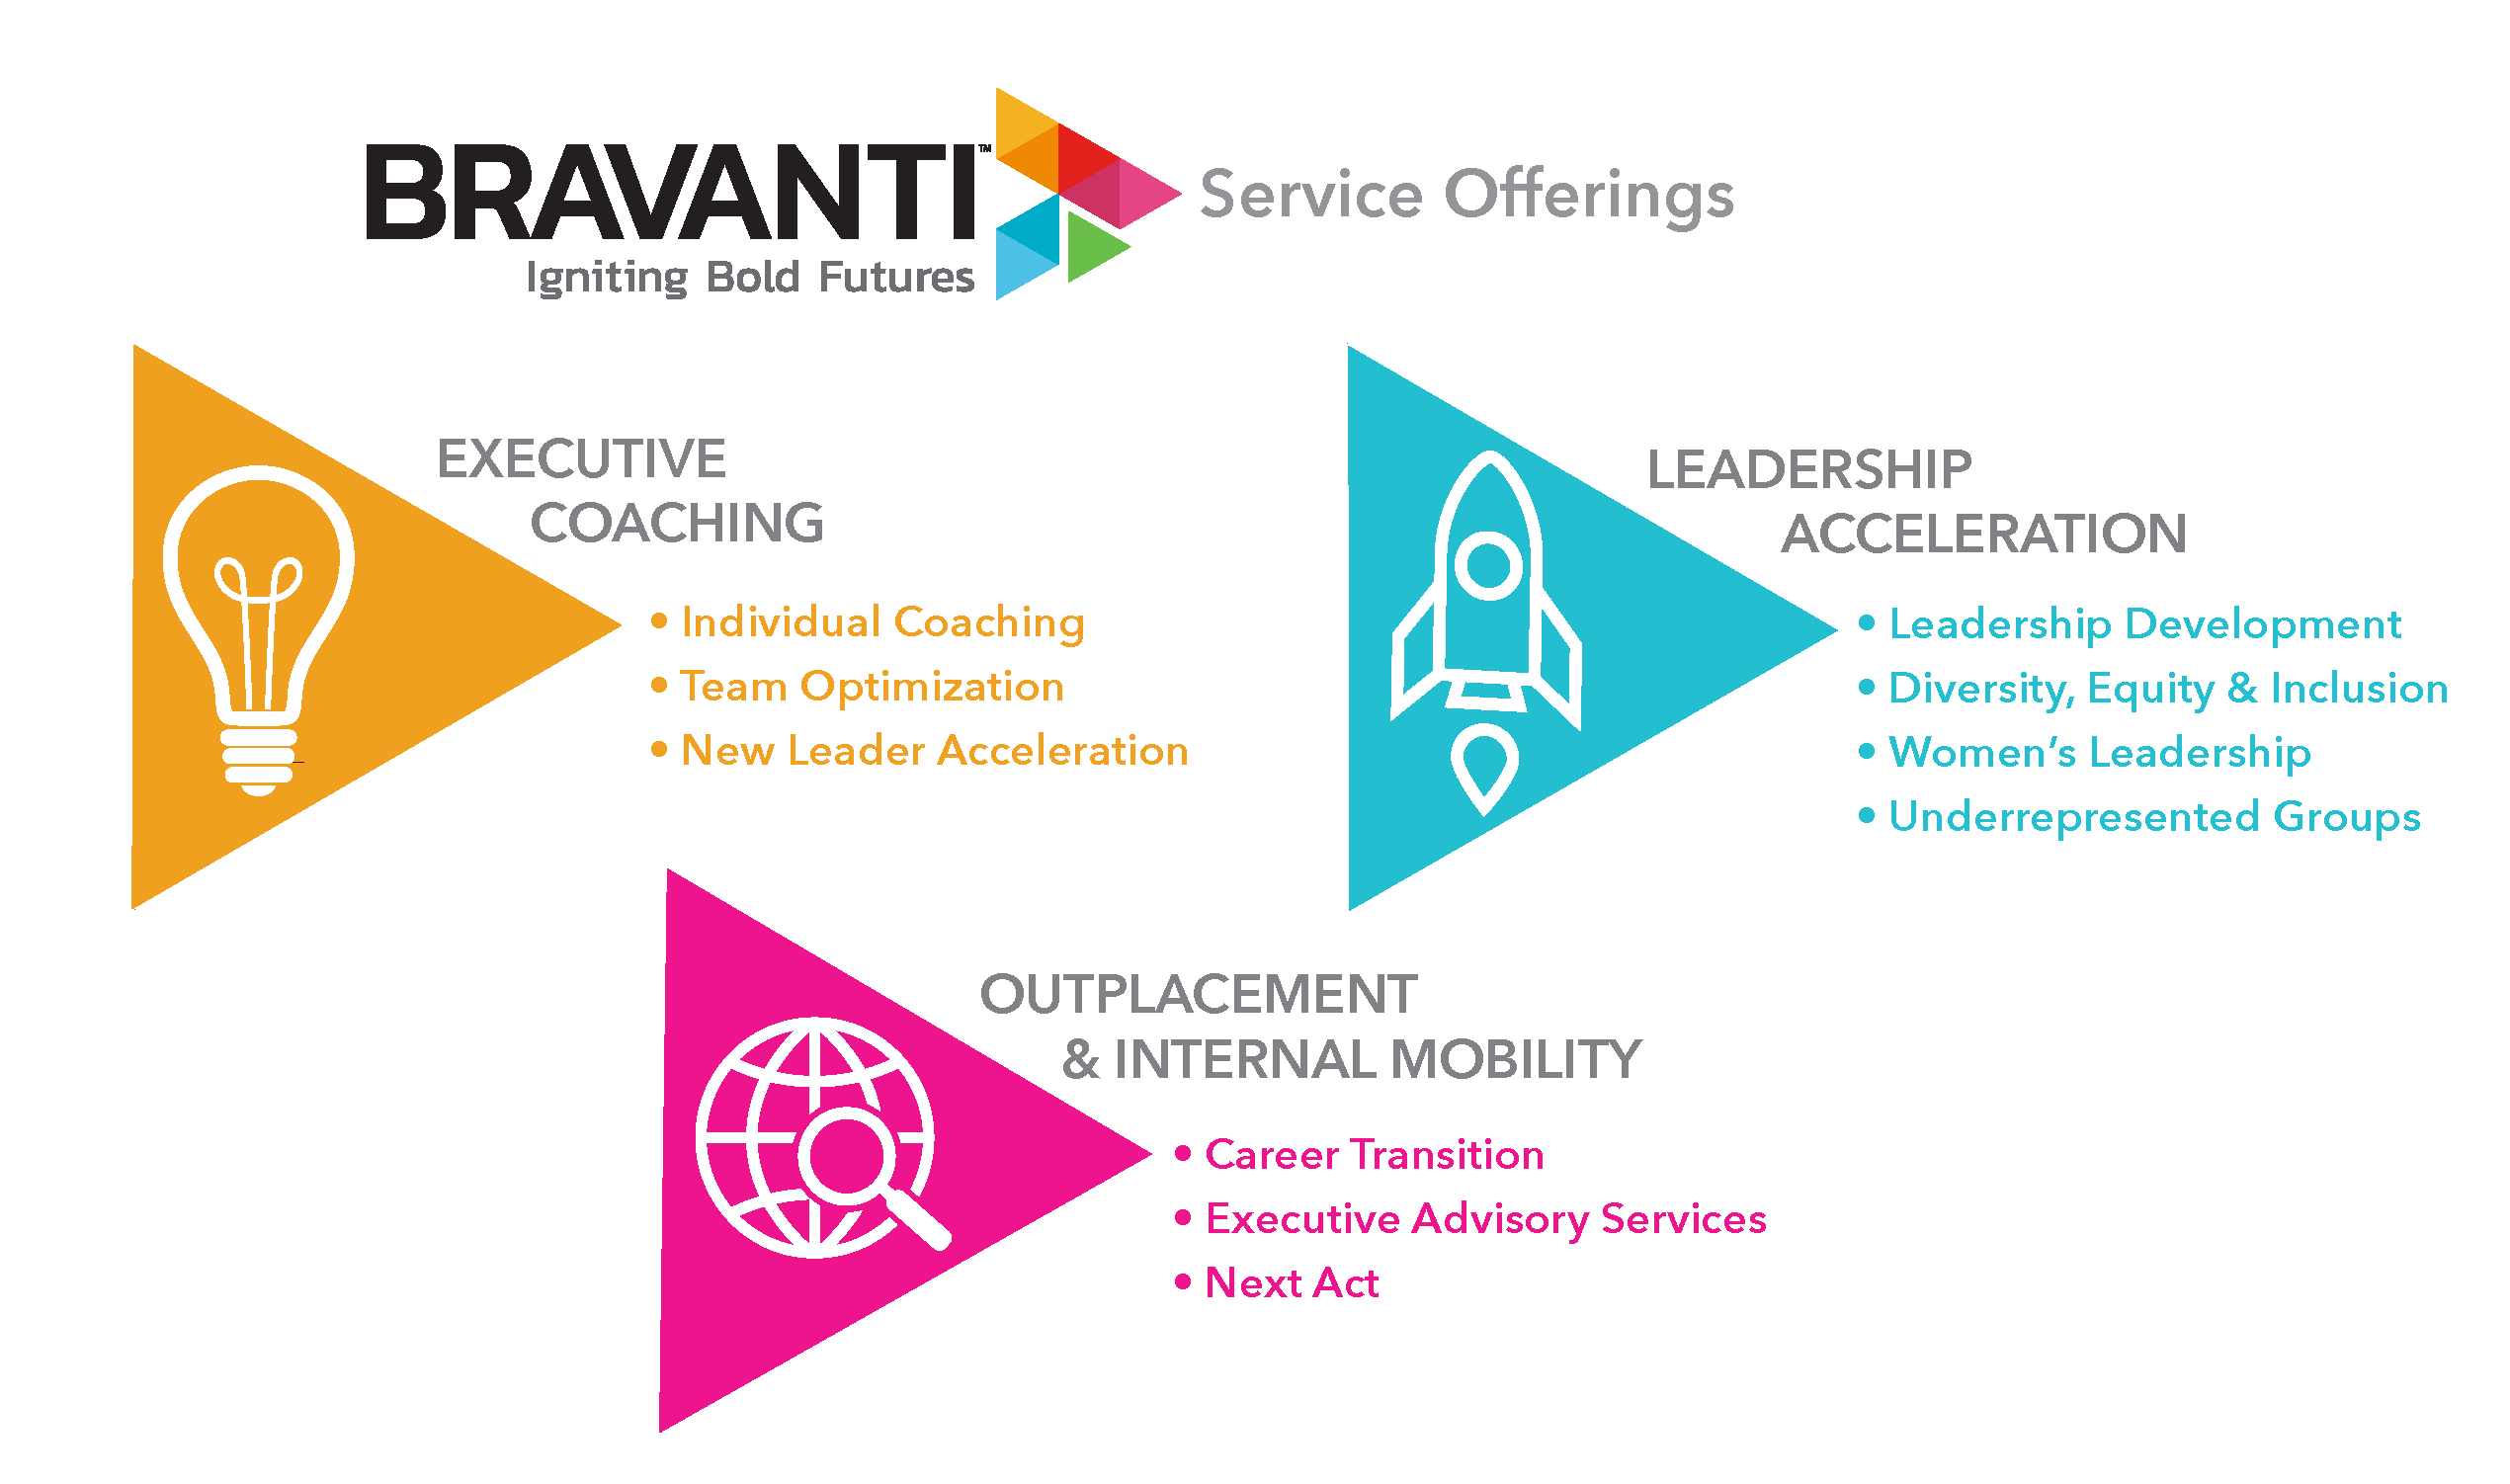 Bravanti offers various programs in the talent development space including executive coaching, leadership acceleration, and outplacement/career transition